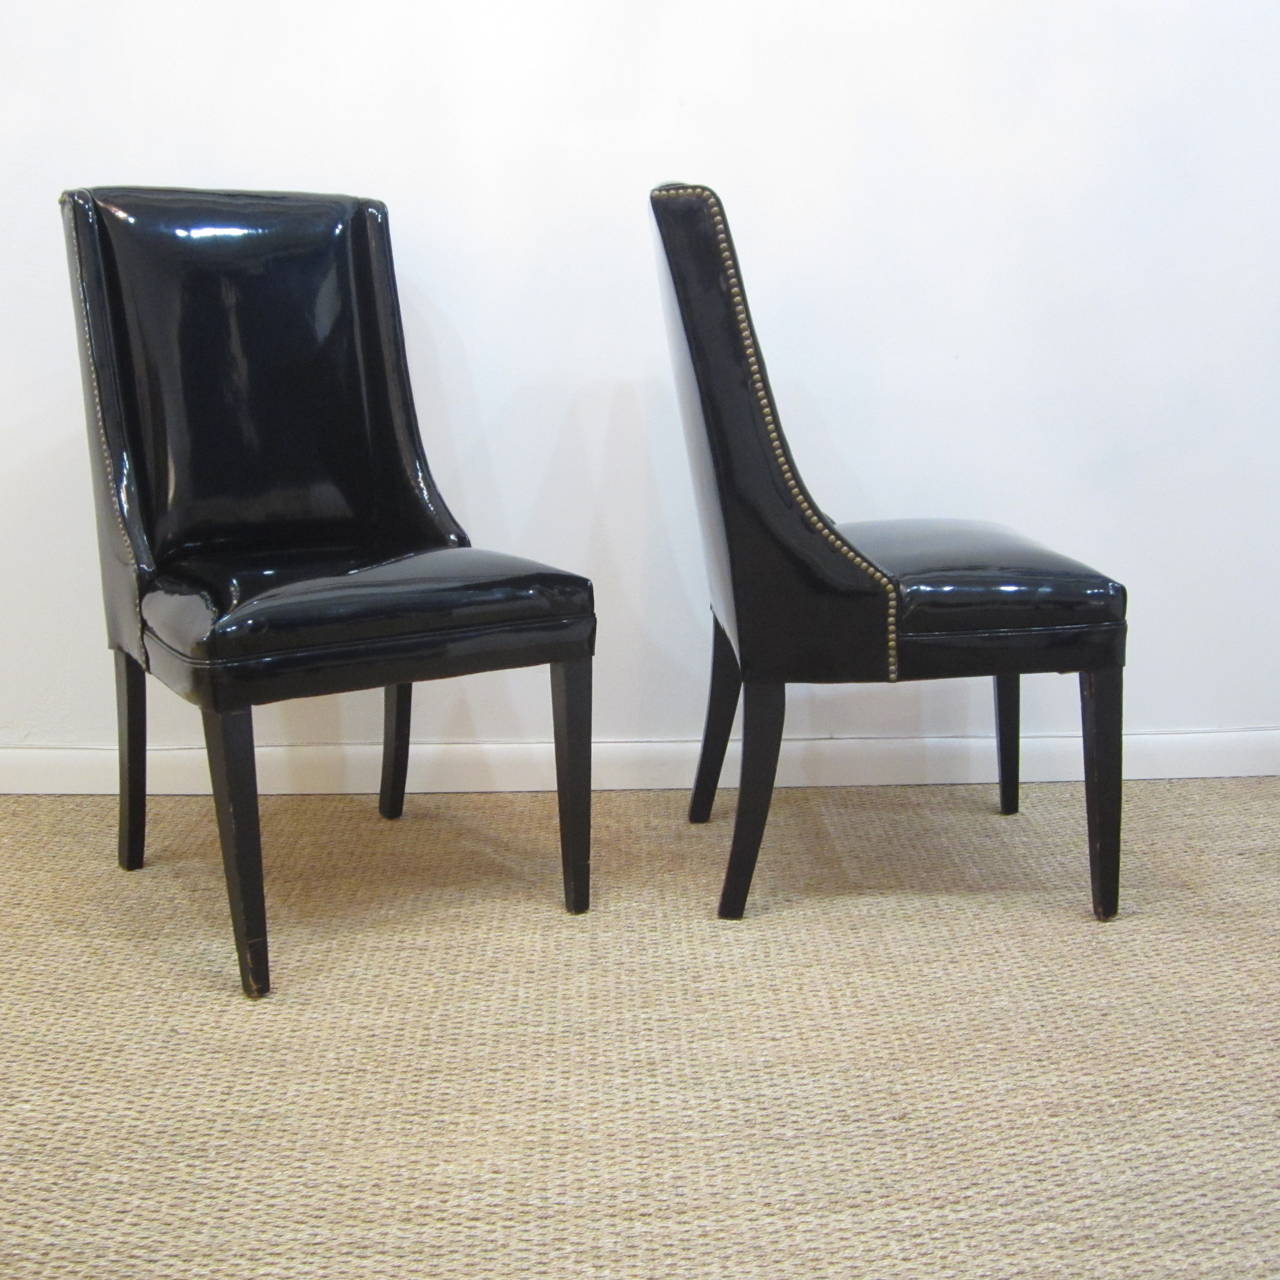 Pair of midcentury side chairs in patent leather with brass studs. The legs are black painted wood with natural ware. These chairs are solid and sturdy and in original condition with tiny imperfections adding  to their beauty.